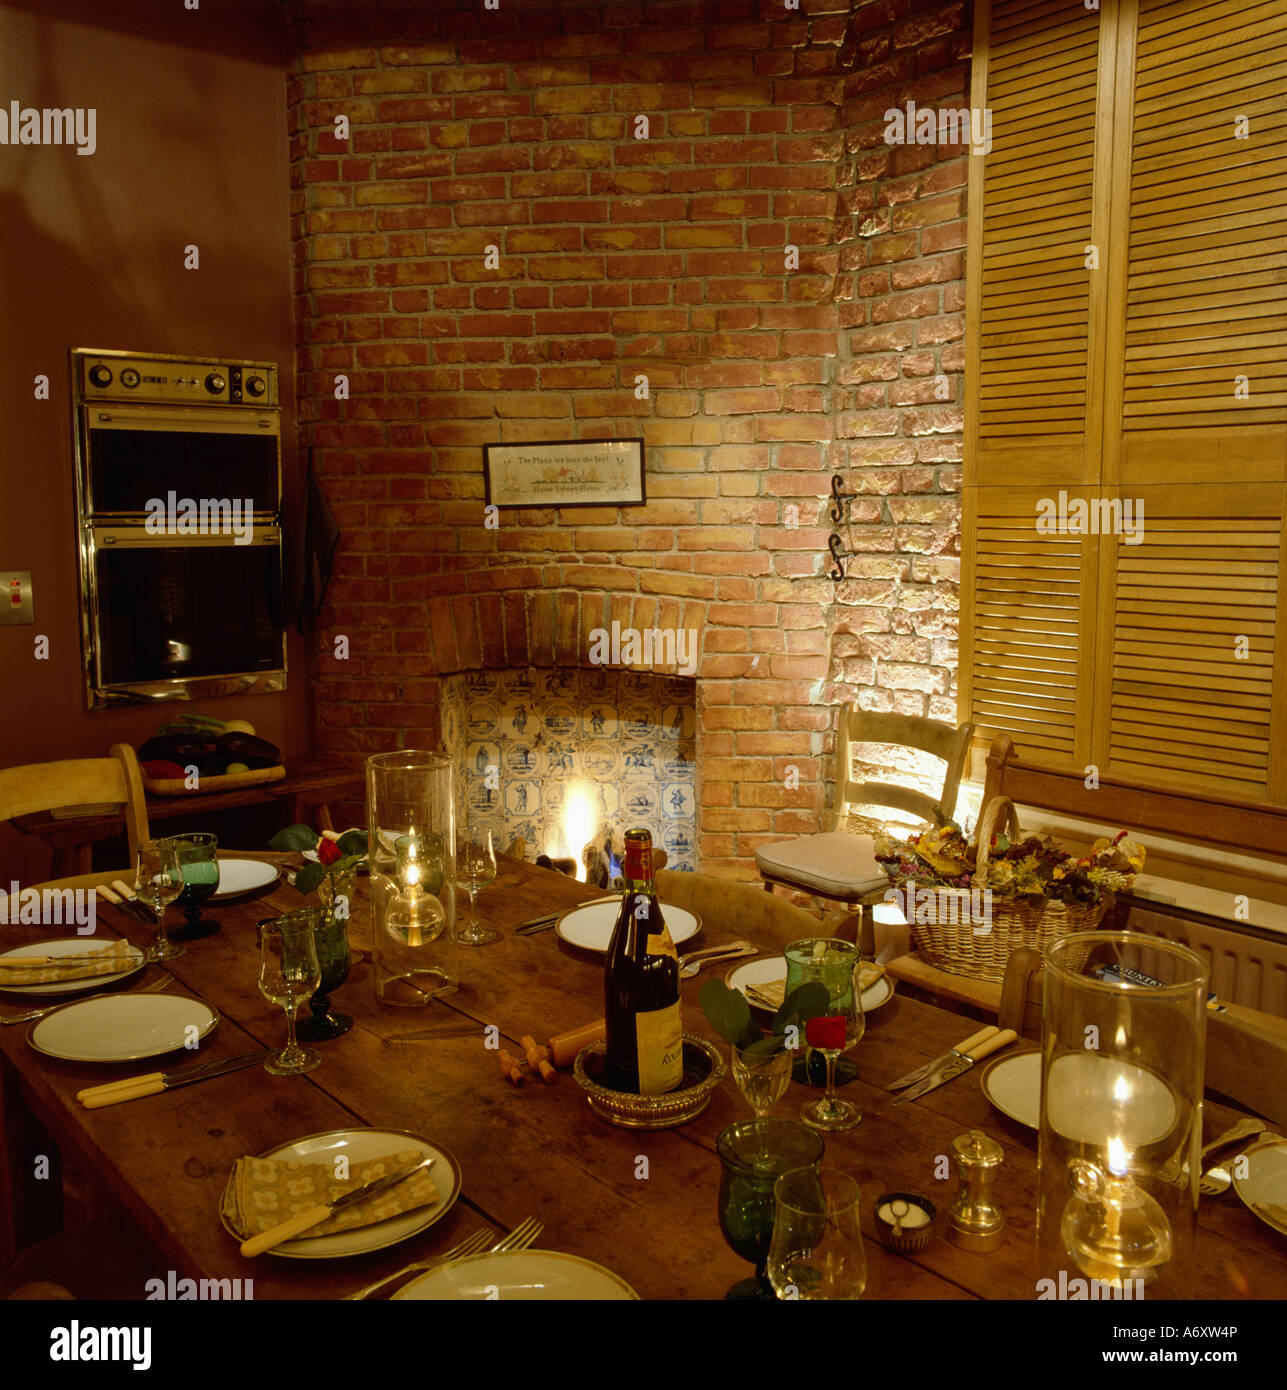 Dining table with place settings beside fireplace in brick wall Stock Photo